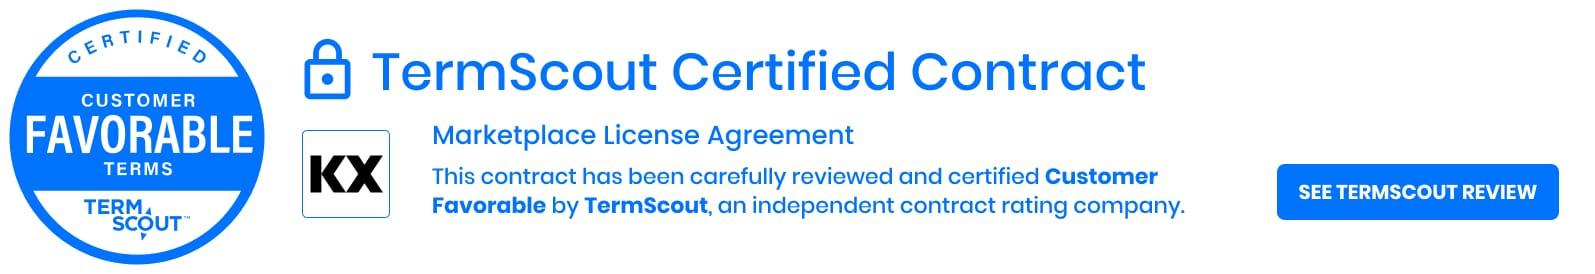 TermScout Certified Contract - Marketplace License Agreement